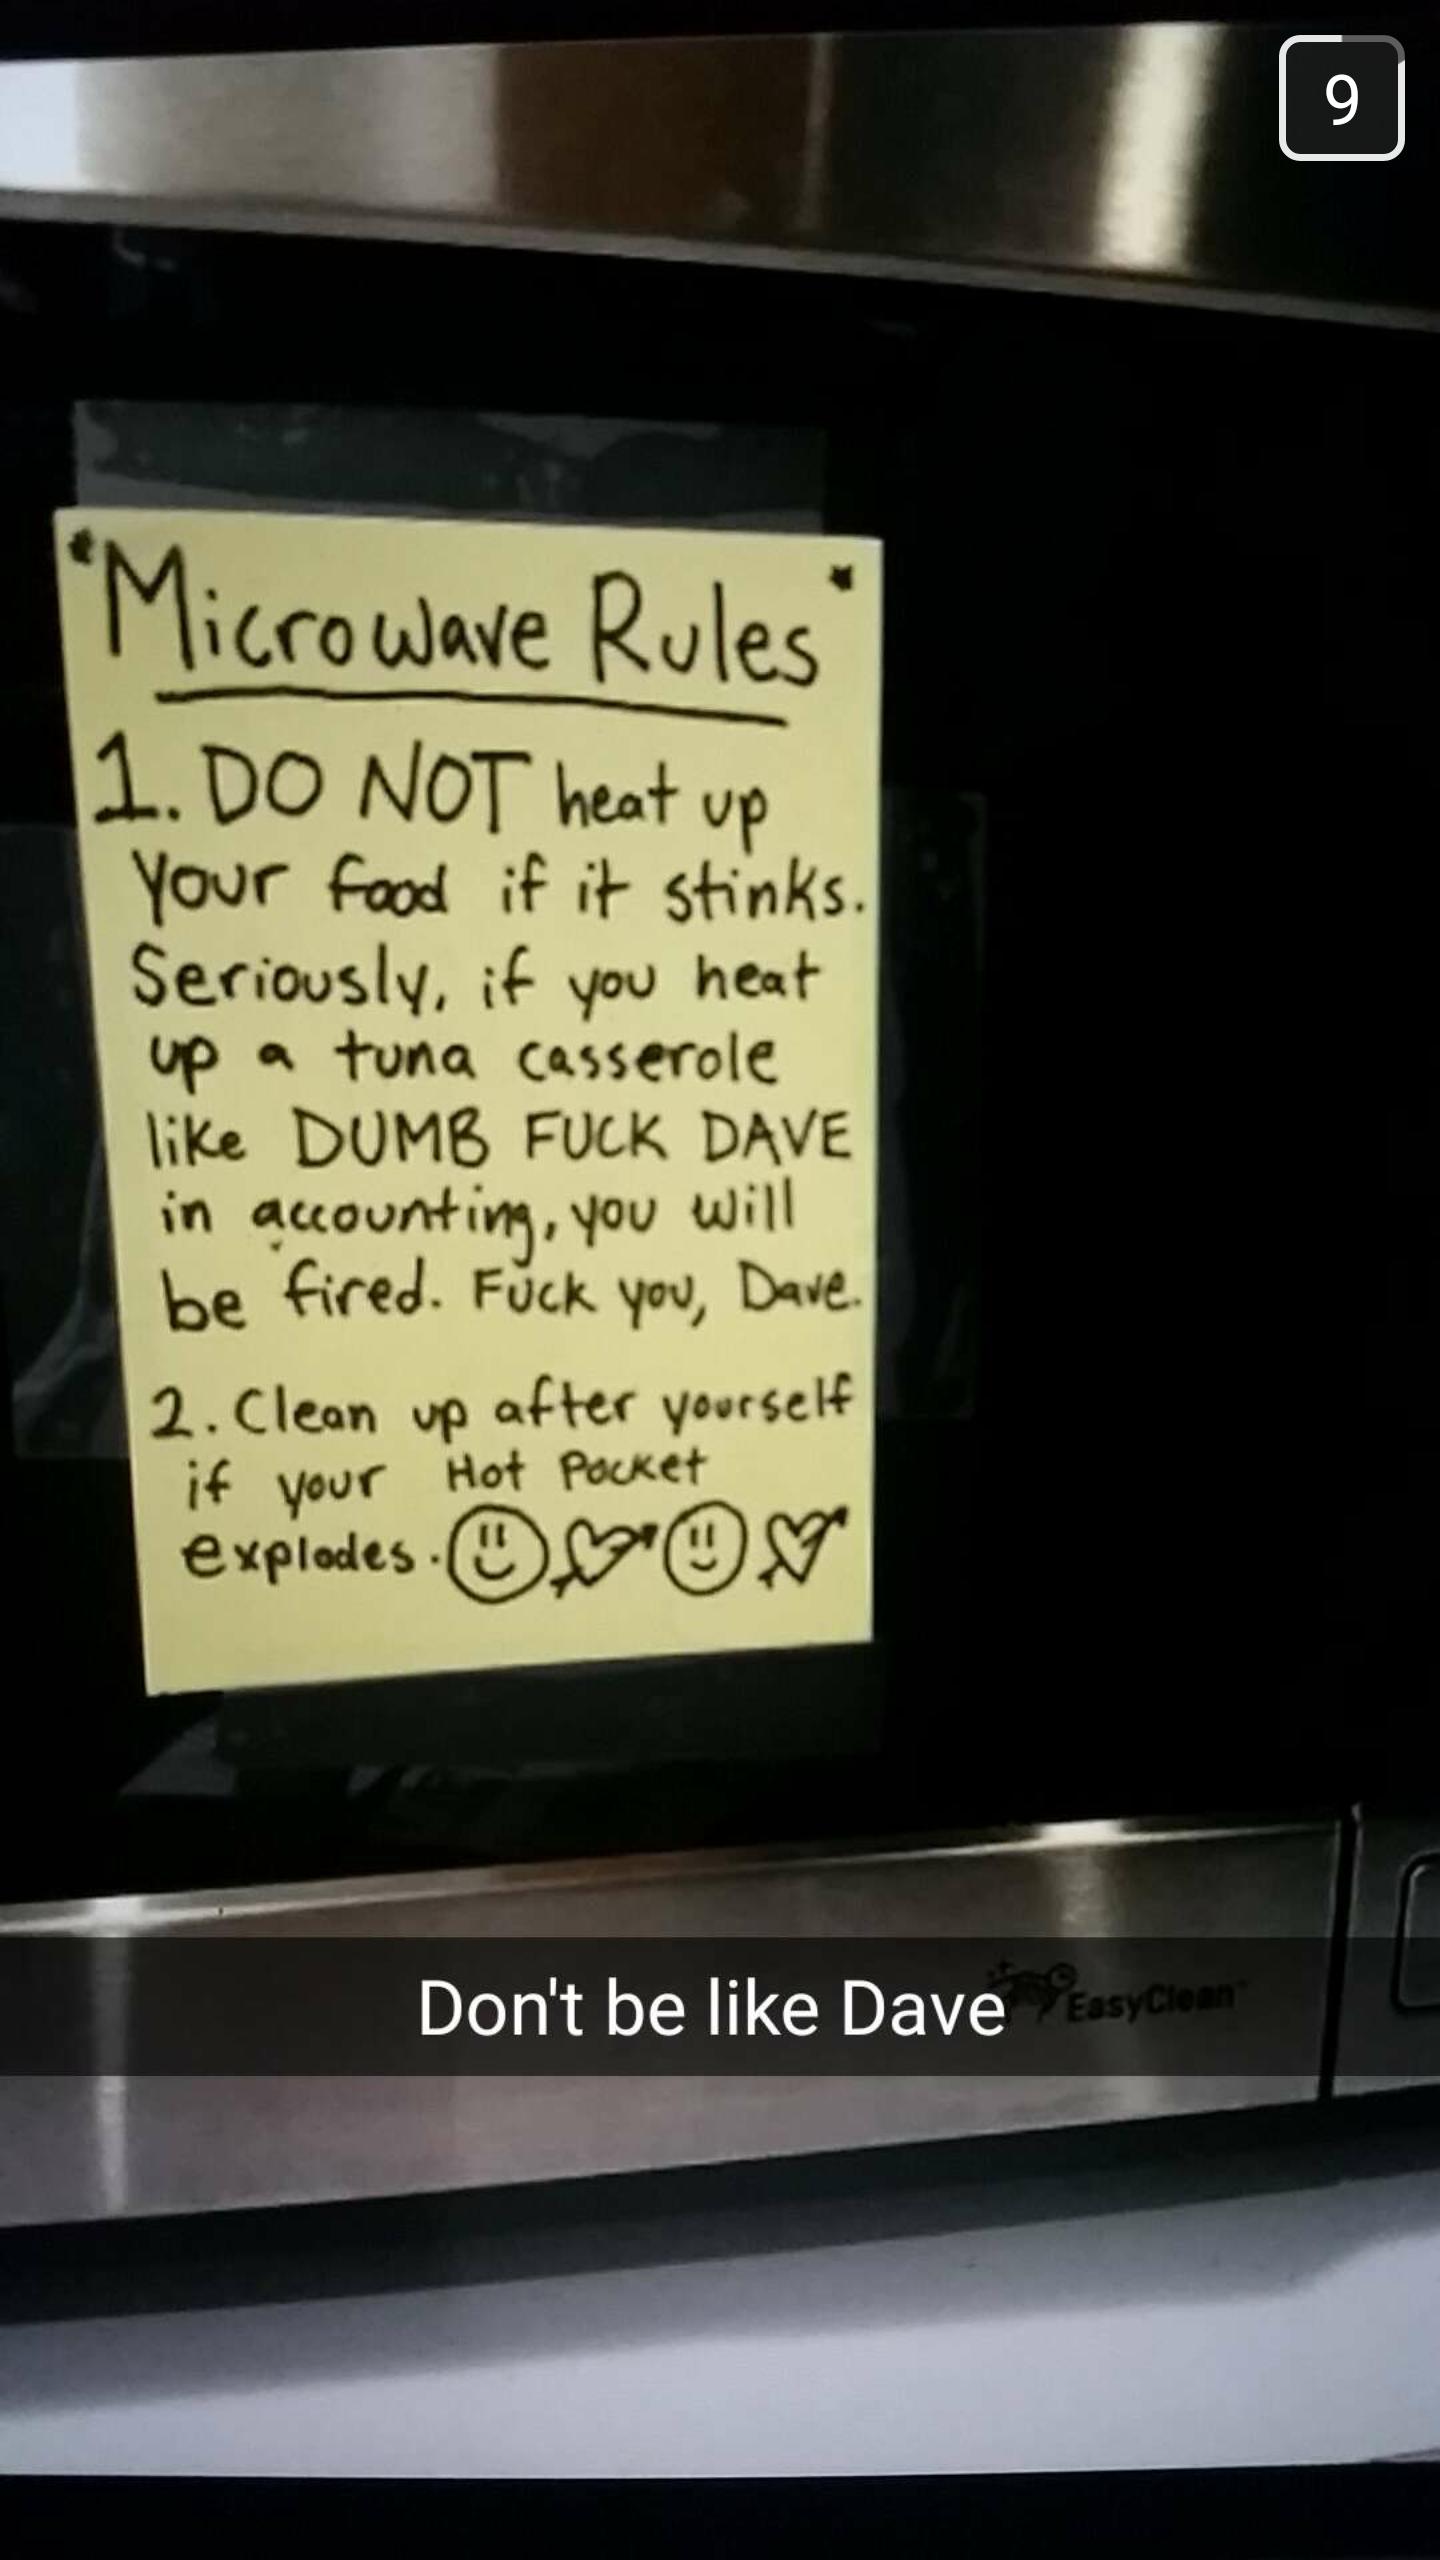 don t be like dave microwave - "Microwave Rules" 1. Do Not heat up Your food if it stinks. Seriously, if you heat up a tuna casserole Dumb Fuck Dave in accounting, you will be fired. Fuck you, Dave. 2. Clean up after yourself if your Hot Pocket explodesOv